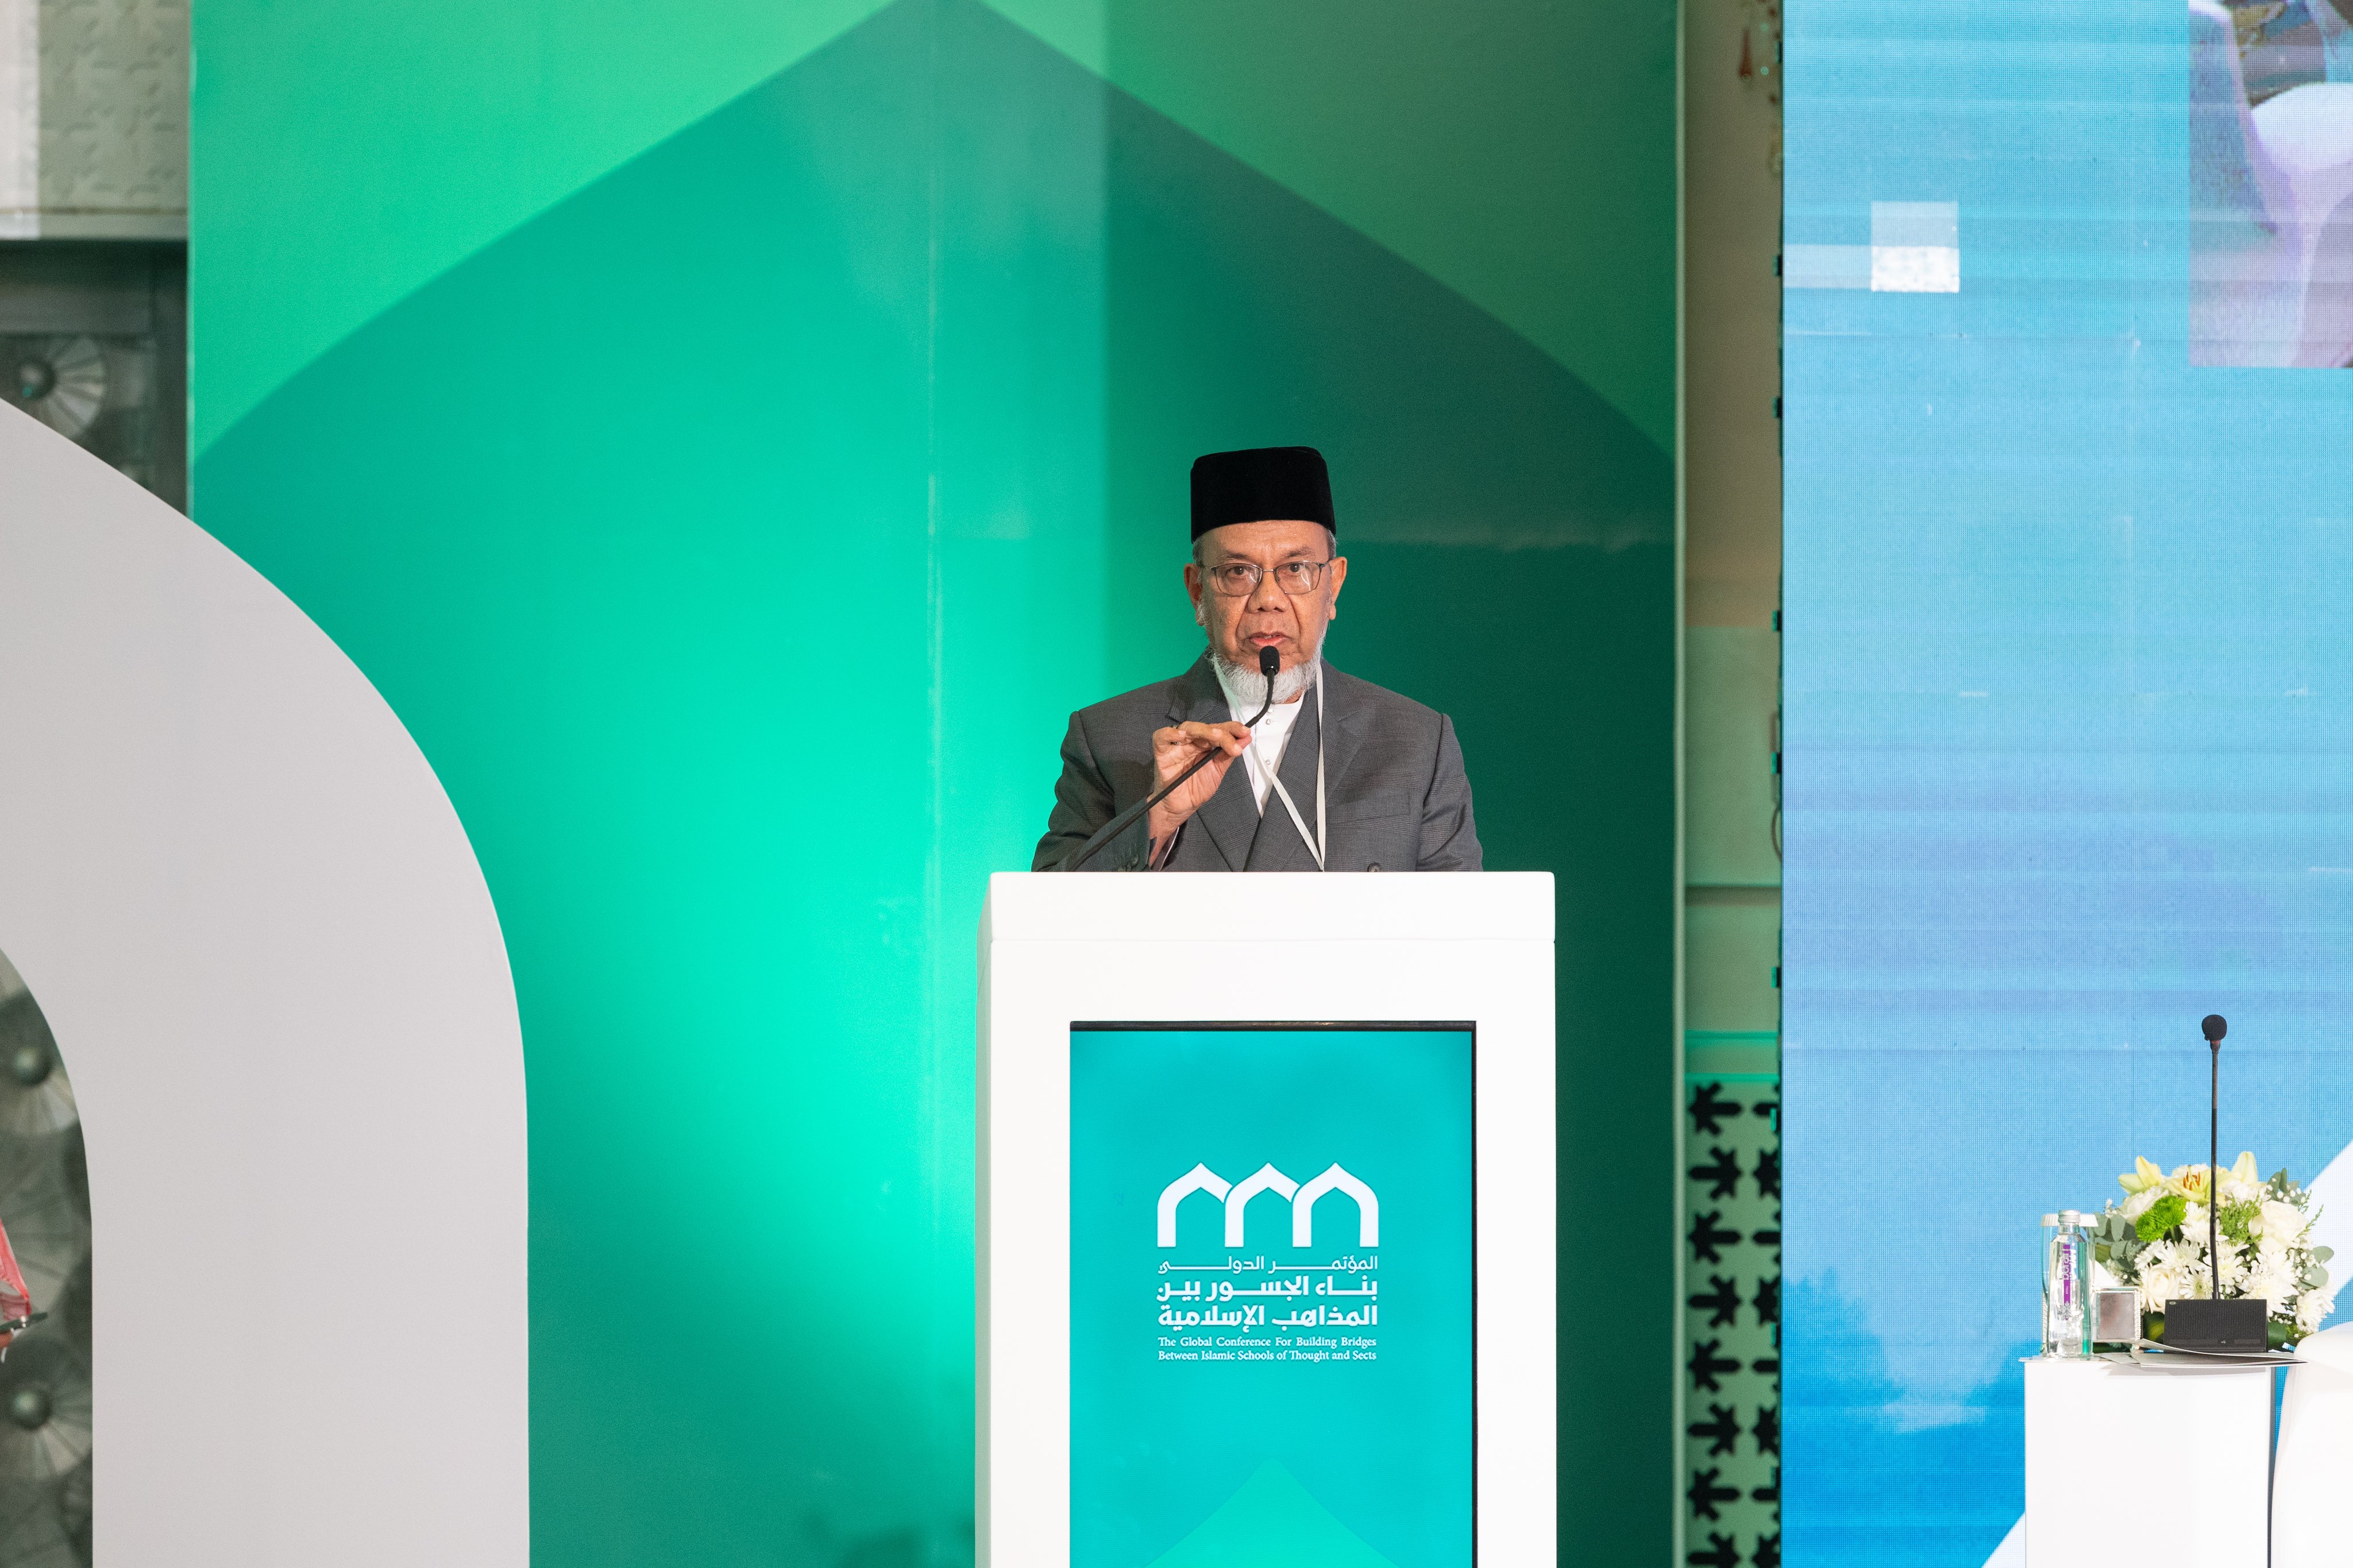 His Eminence Sheikh Wan Mohammed bin Abdulaziz, President of the Malaysian Ulema ‎Association, at the opening ceremony at the Global Conference for Building Bridges between Islamic Schools of Thought and Sects: